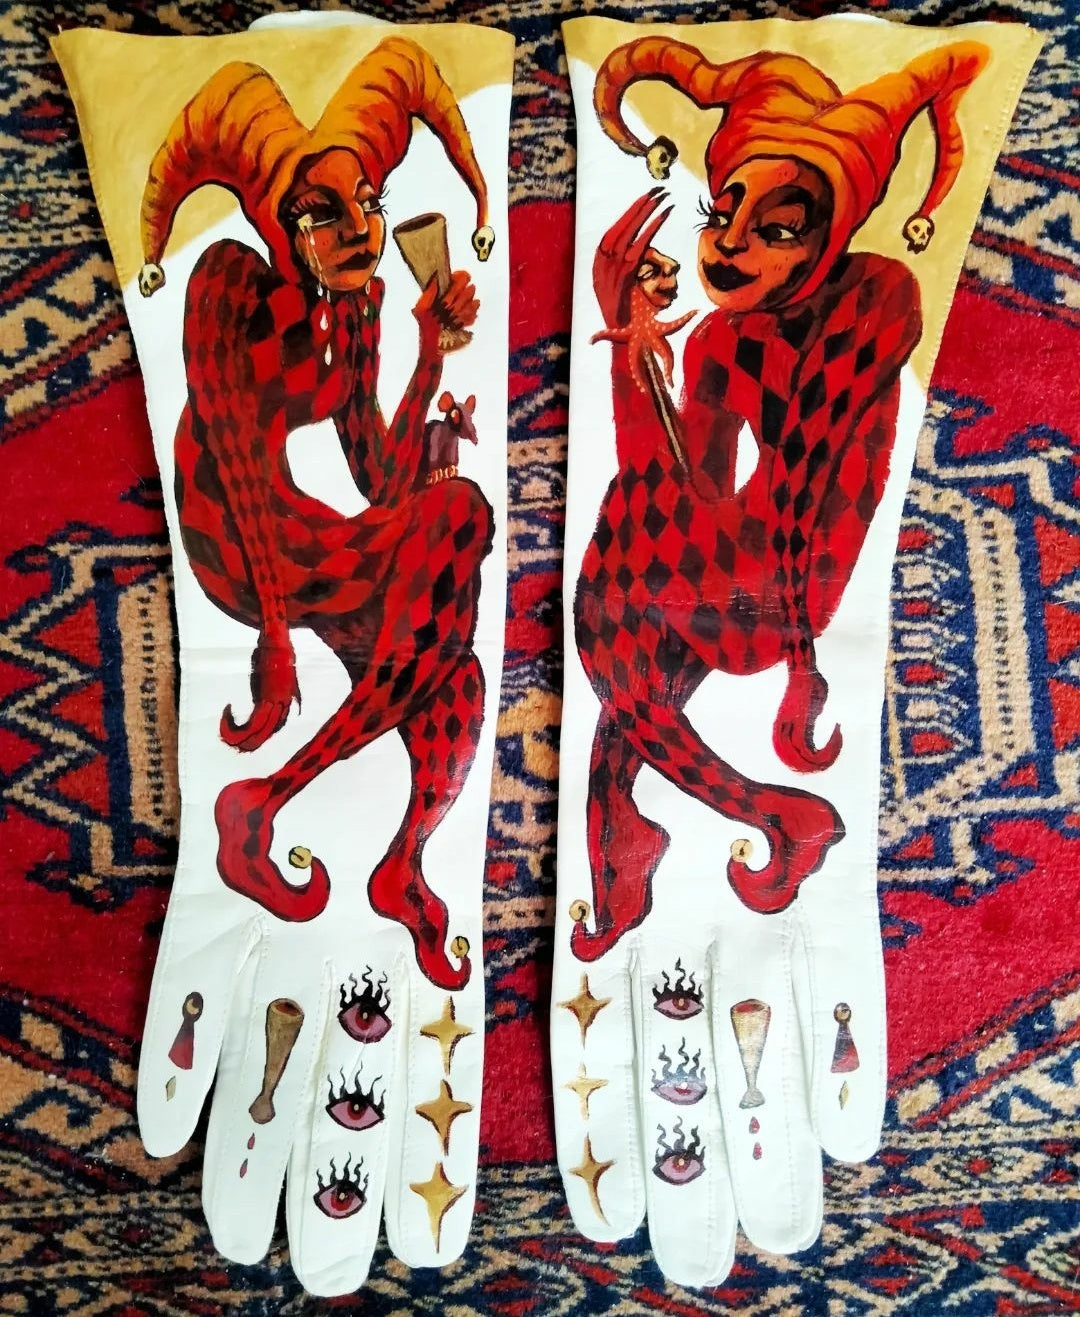 Emotions of the Jester Hand-painted Leather GLOVES